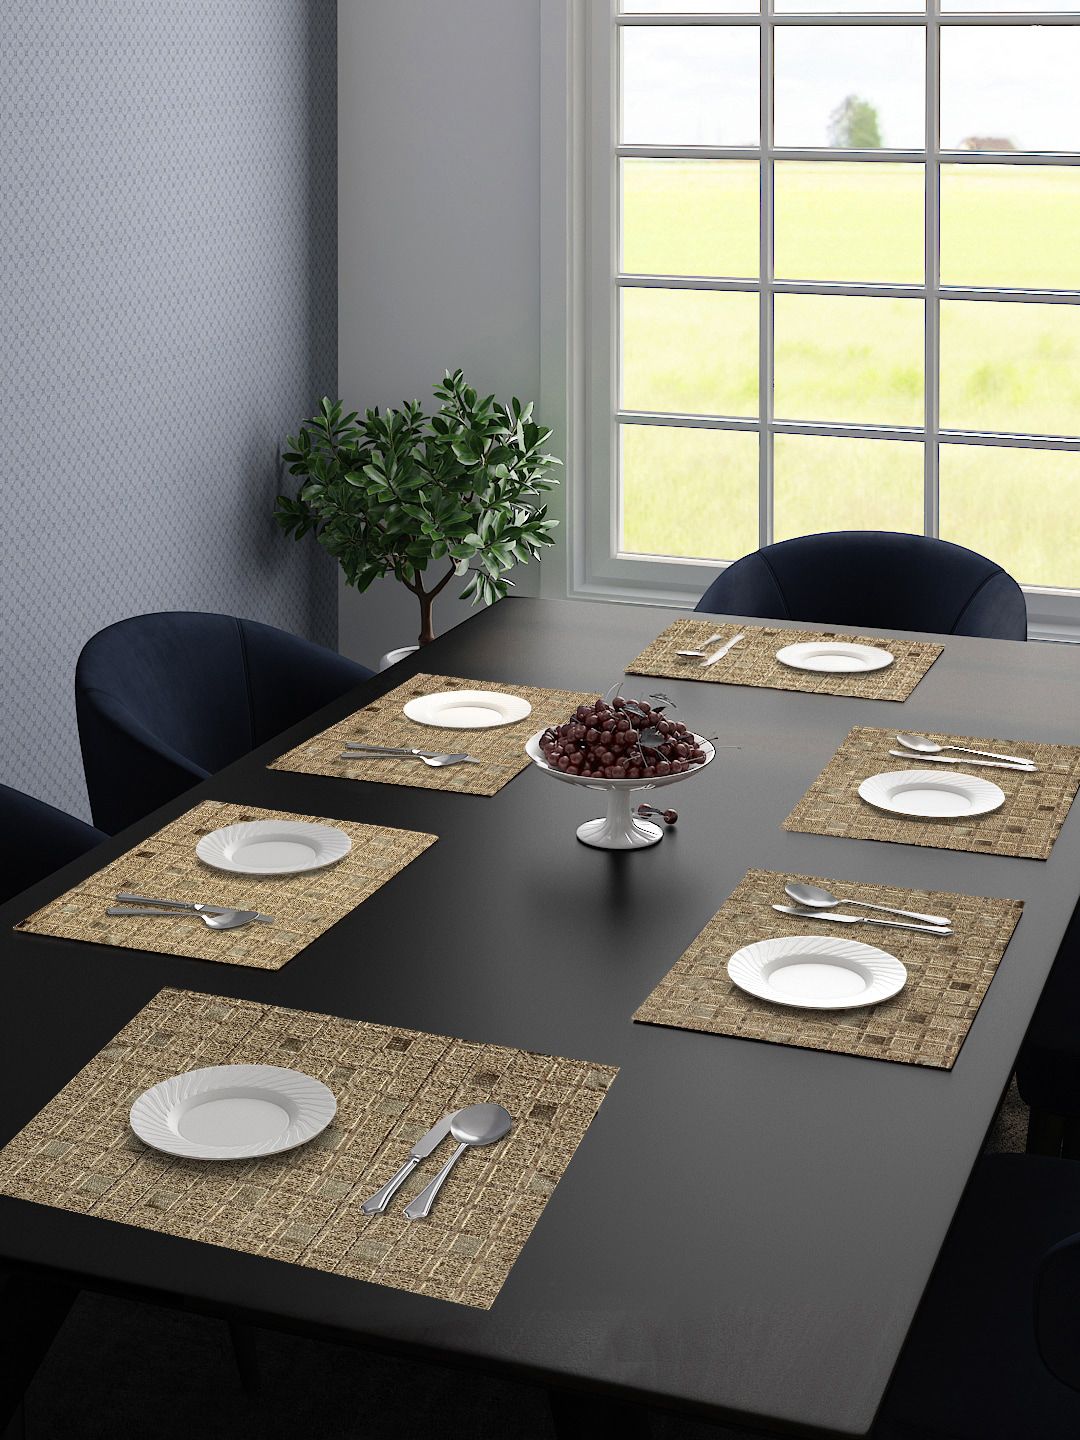 Saral Home Set Of 6 Beige & Brown Rectangular Table Placemats Price in India